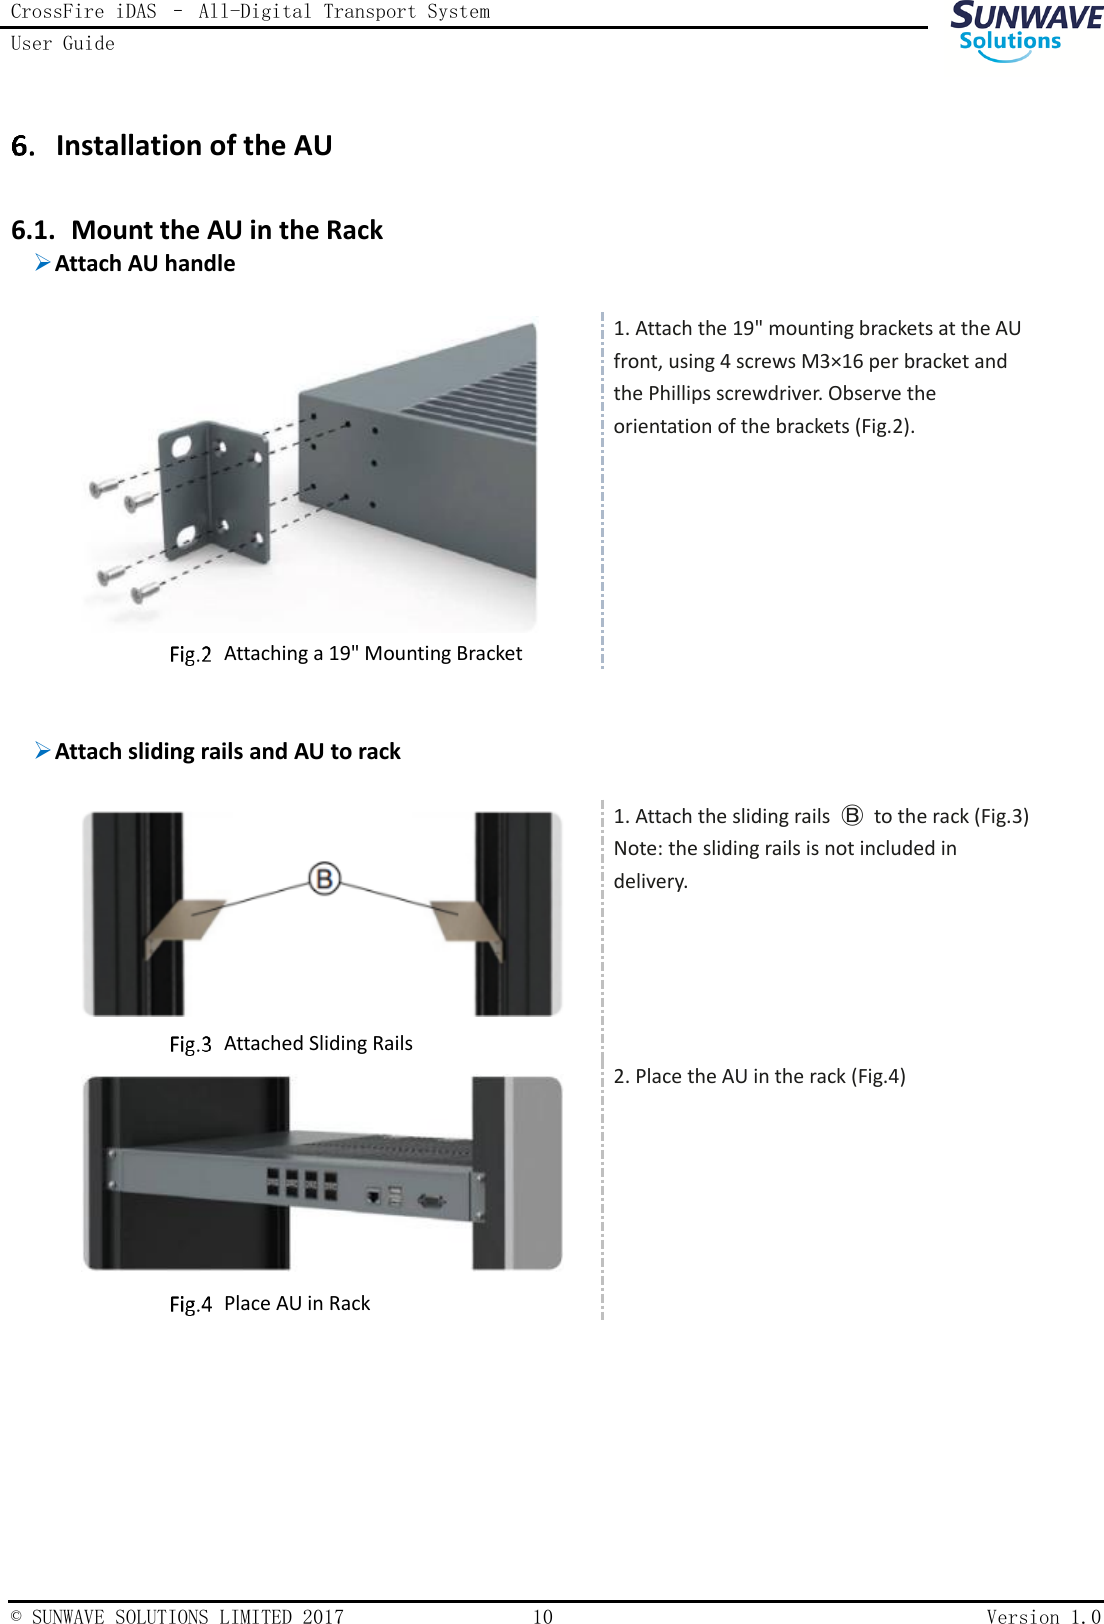 CrossFire iDAS – All-Digital Transport System User Guide    © SUNWAVE SOLUTIONS LIMITED 2017  10  Version 1.0   Installation of the AU 6.1. Mount the AU in the Rack  Attach AU handle      Attaching a 19&quot; Mounting Bracket 1. Attach the 19&quot; mounting brackets at the AU front, using 4 screws M3×16 per bracket and the Phillips screwdriver. Observe the orientation of the brackets (Fig.2).     Attach sliding rails and AU to rack      Attached Sliding Rails 1. Attach the sliding rails  Ⓑ  to the rack (Fig.3) Note: the sliding rails is not included in delivery.     Place AU in Rack 2. Place the AU in the rack (Fig.4) 